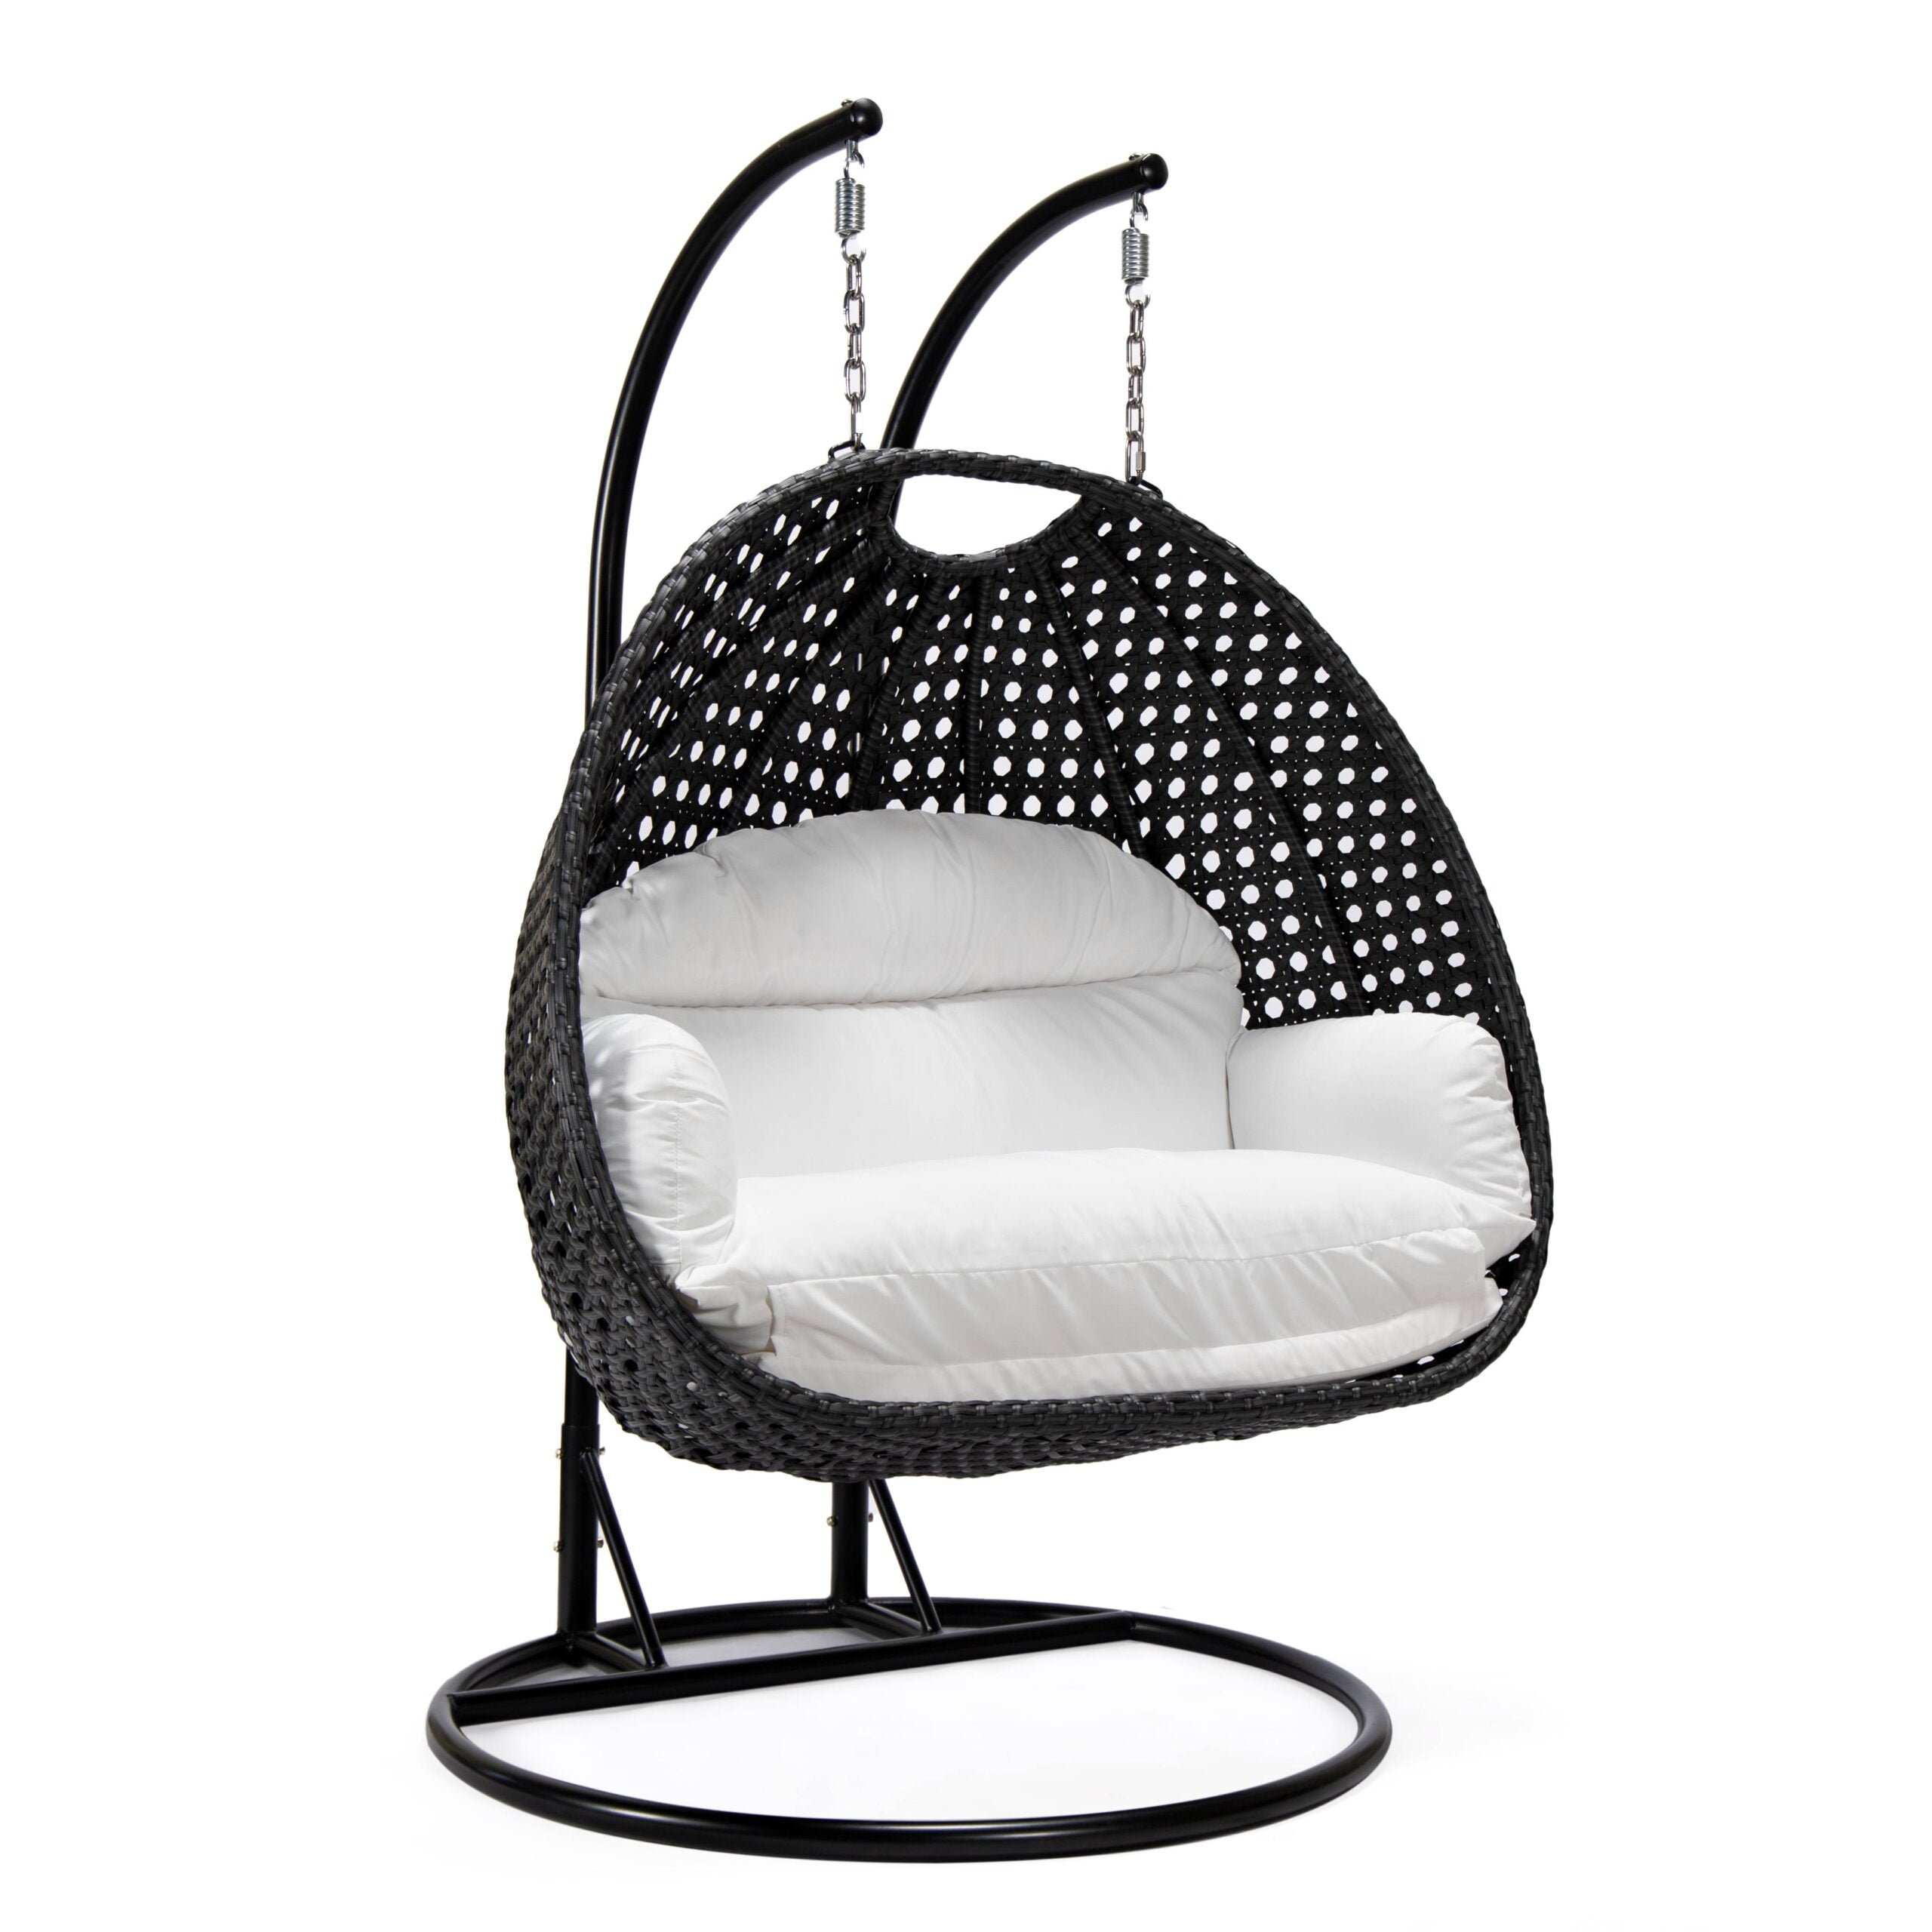 Maia Egg Swing with Seat Cushion and 2 Back Cushions, Kettal